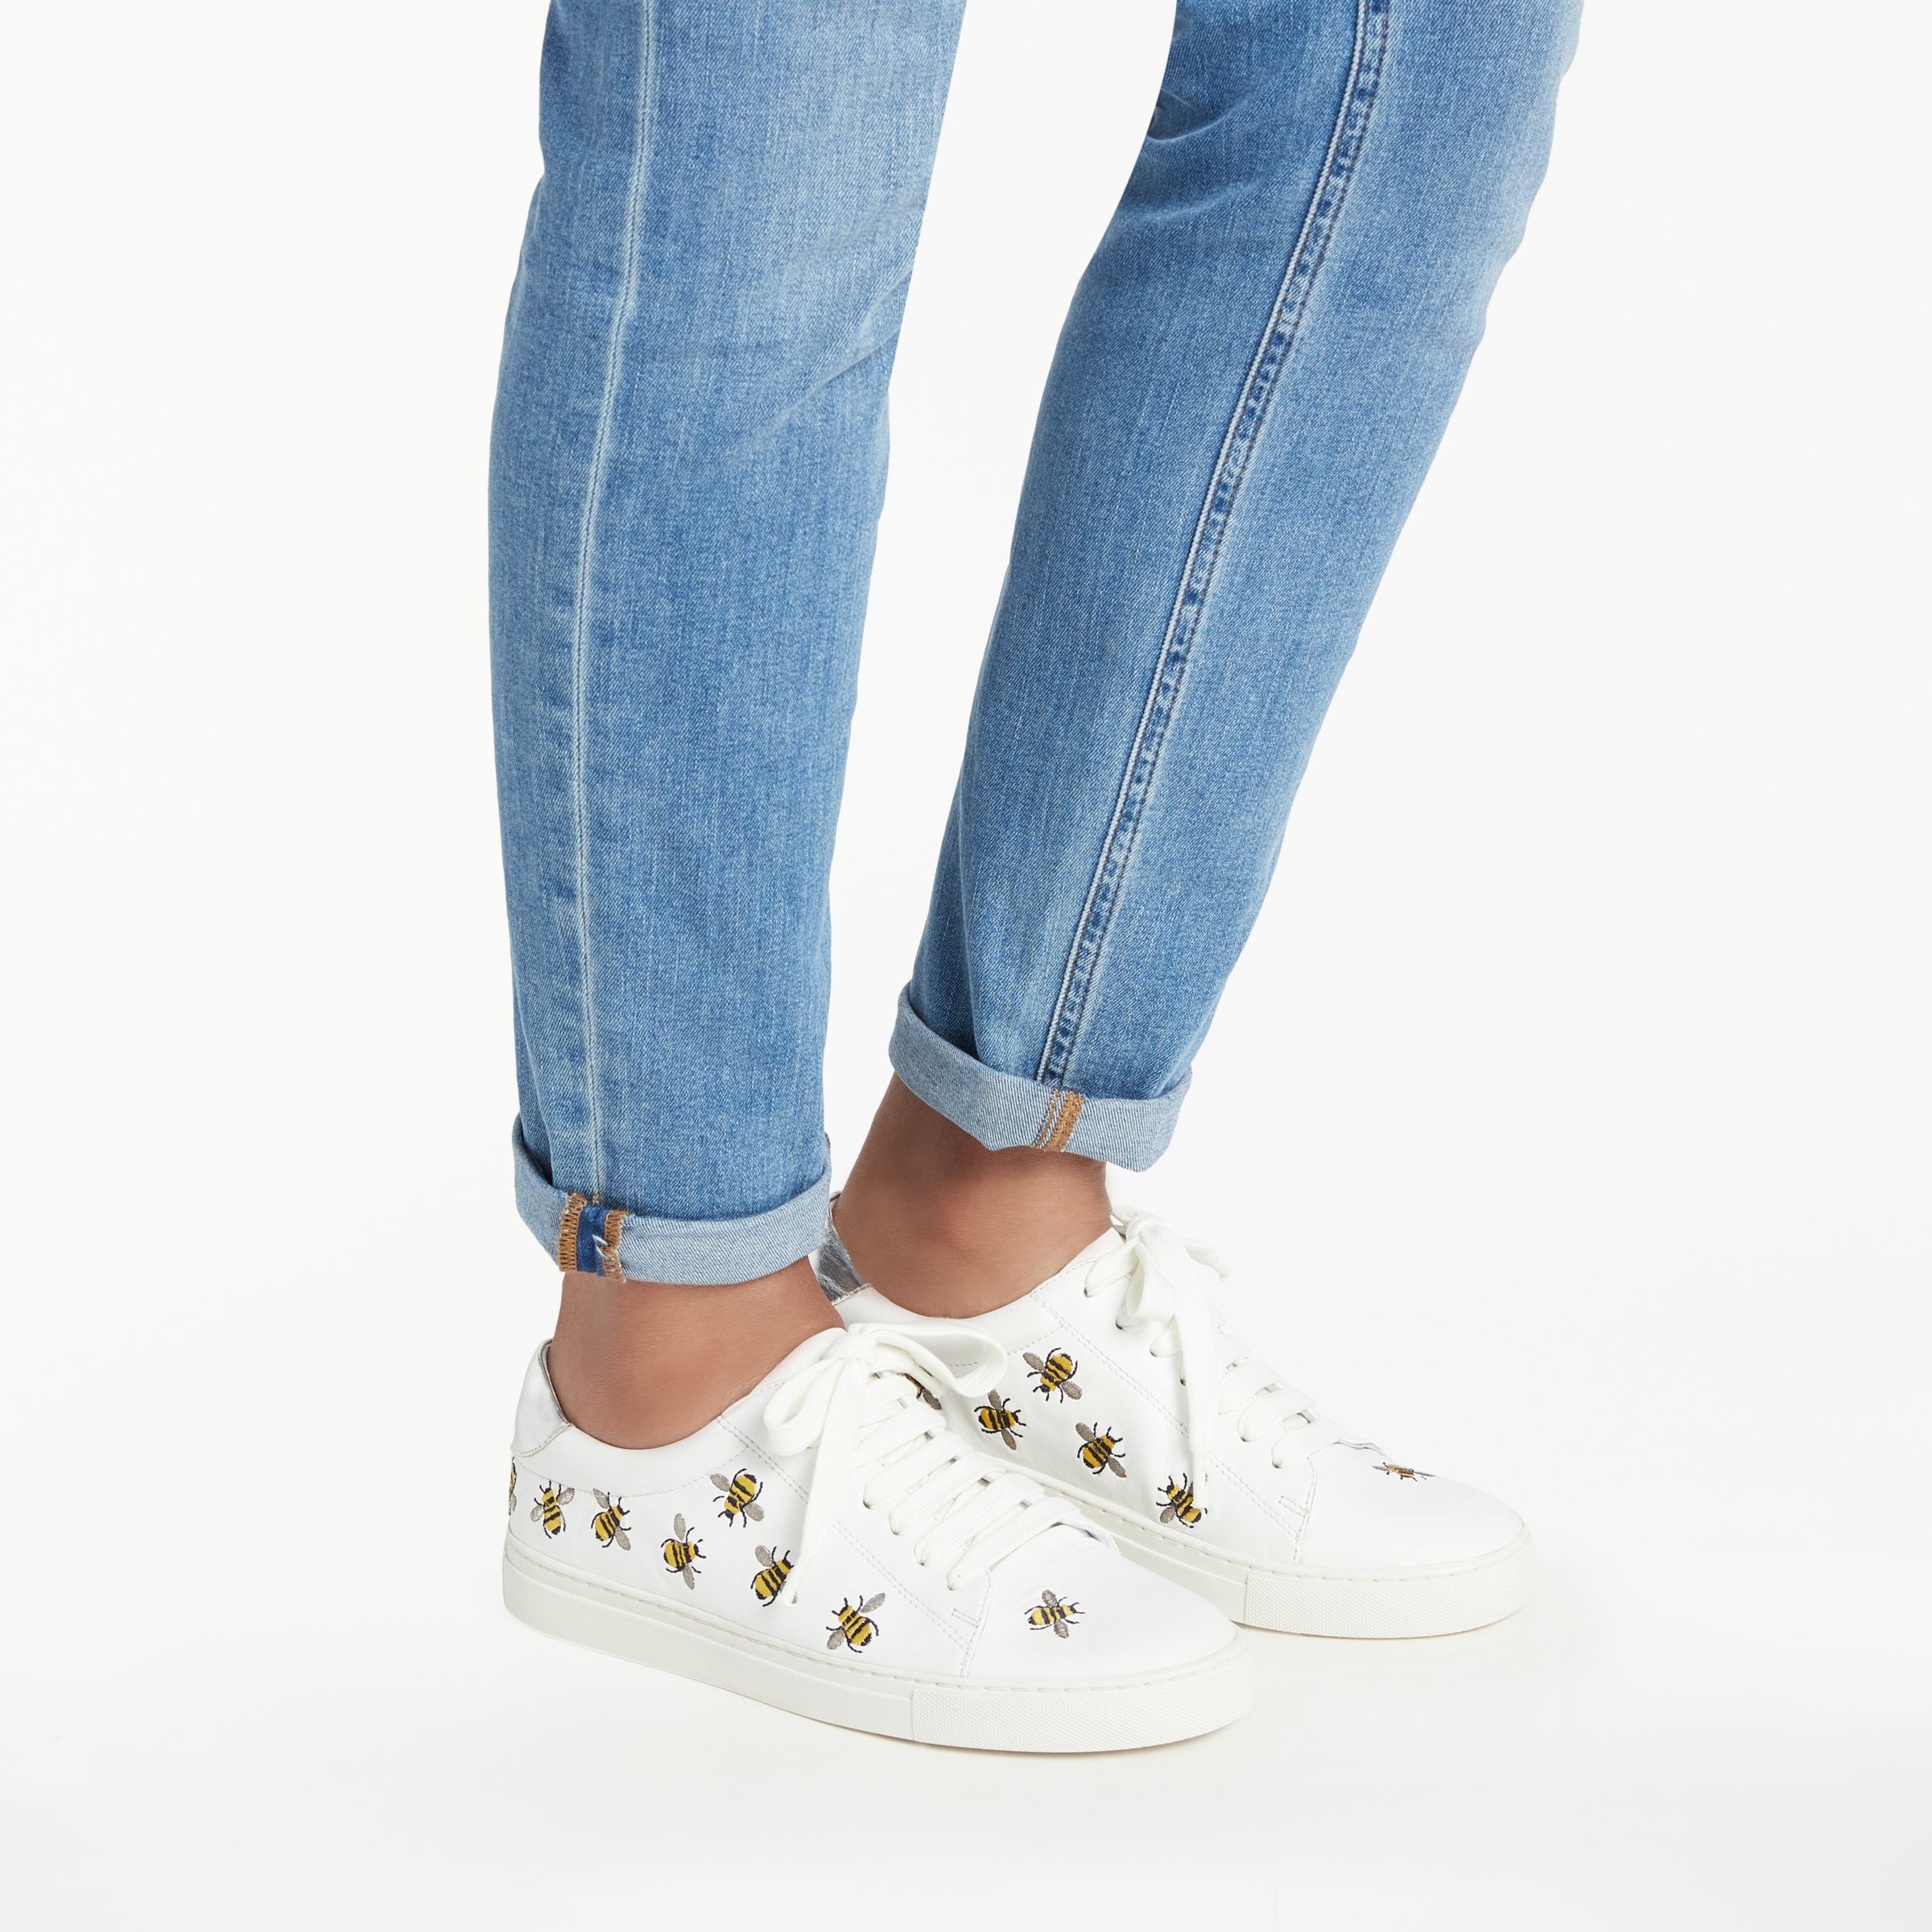 Boden Hollie Bumble Bee Lace Up 